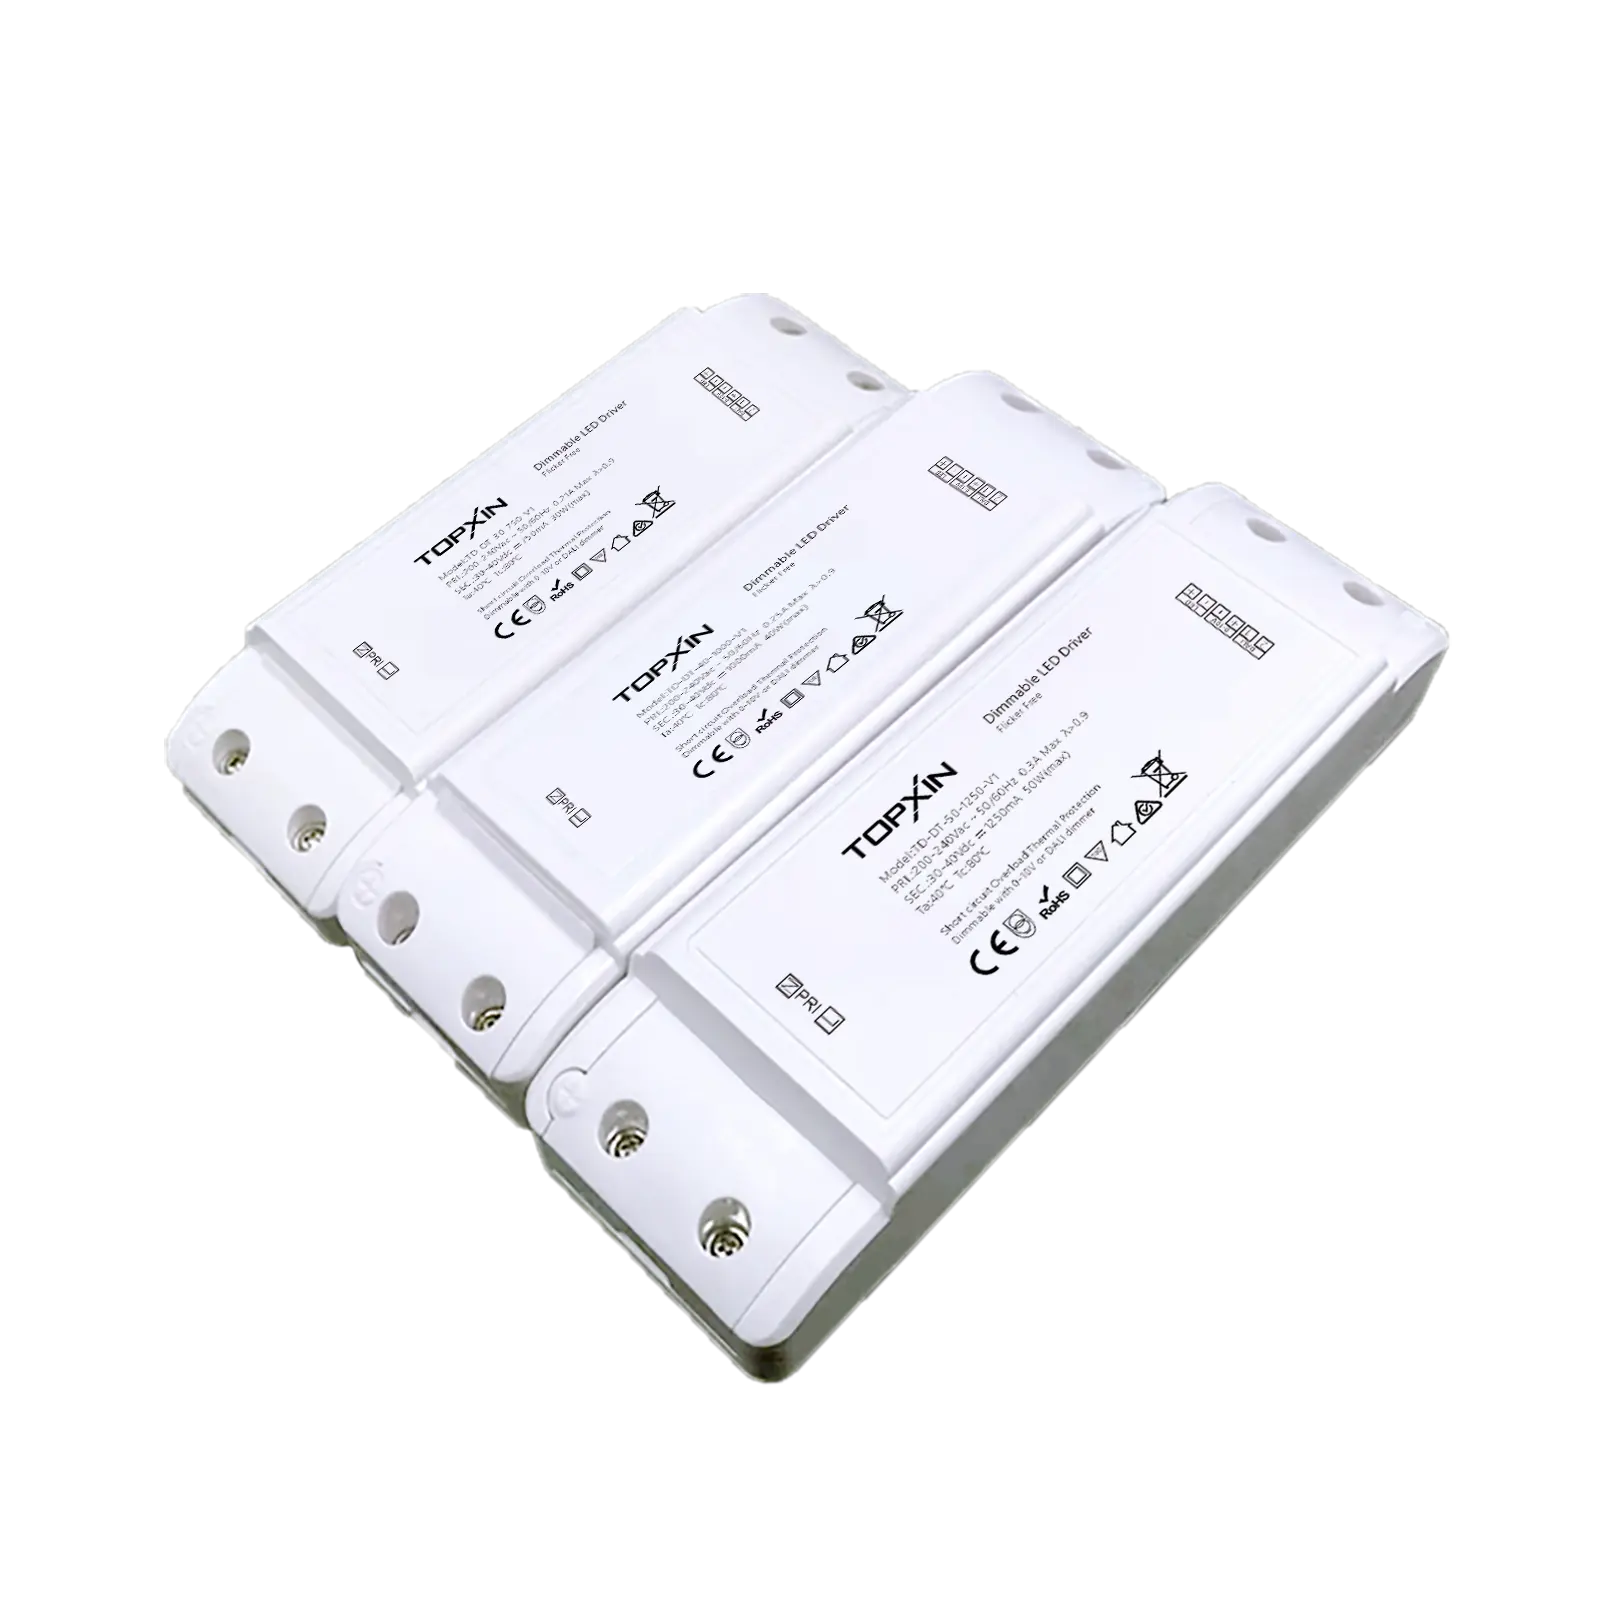 DALI Dimming 40W 1000mA lighting switching power supply no flicker Isolation constant current dimmable led driver